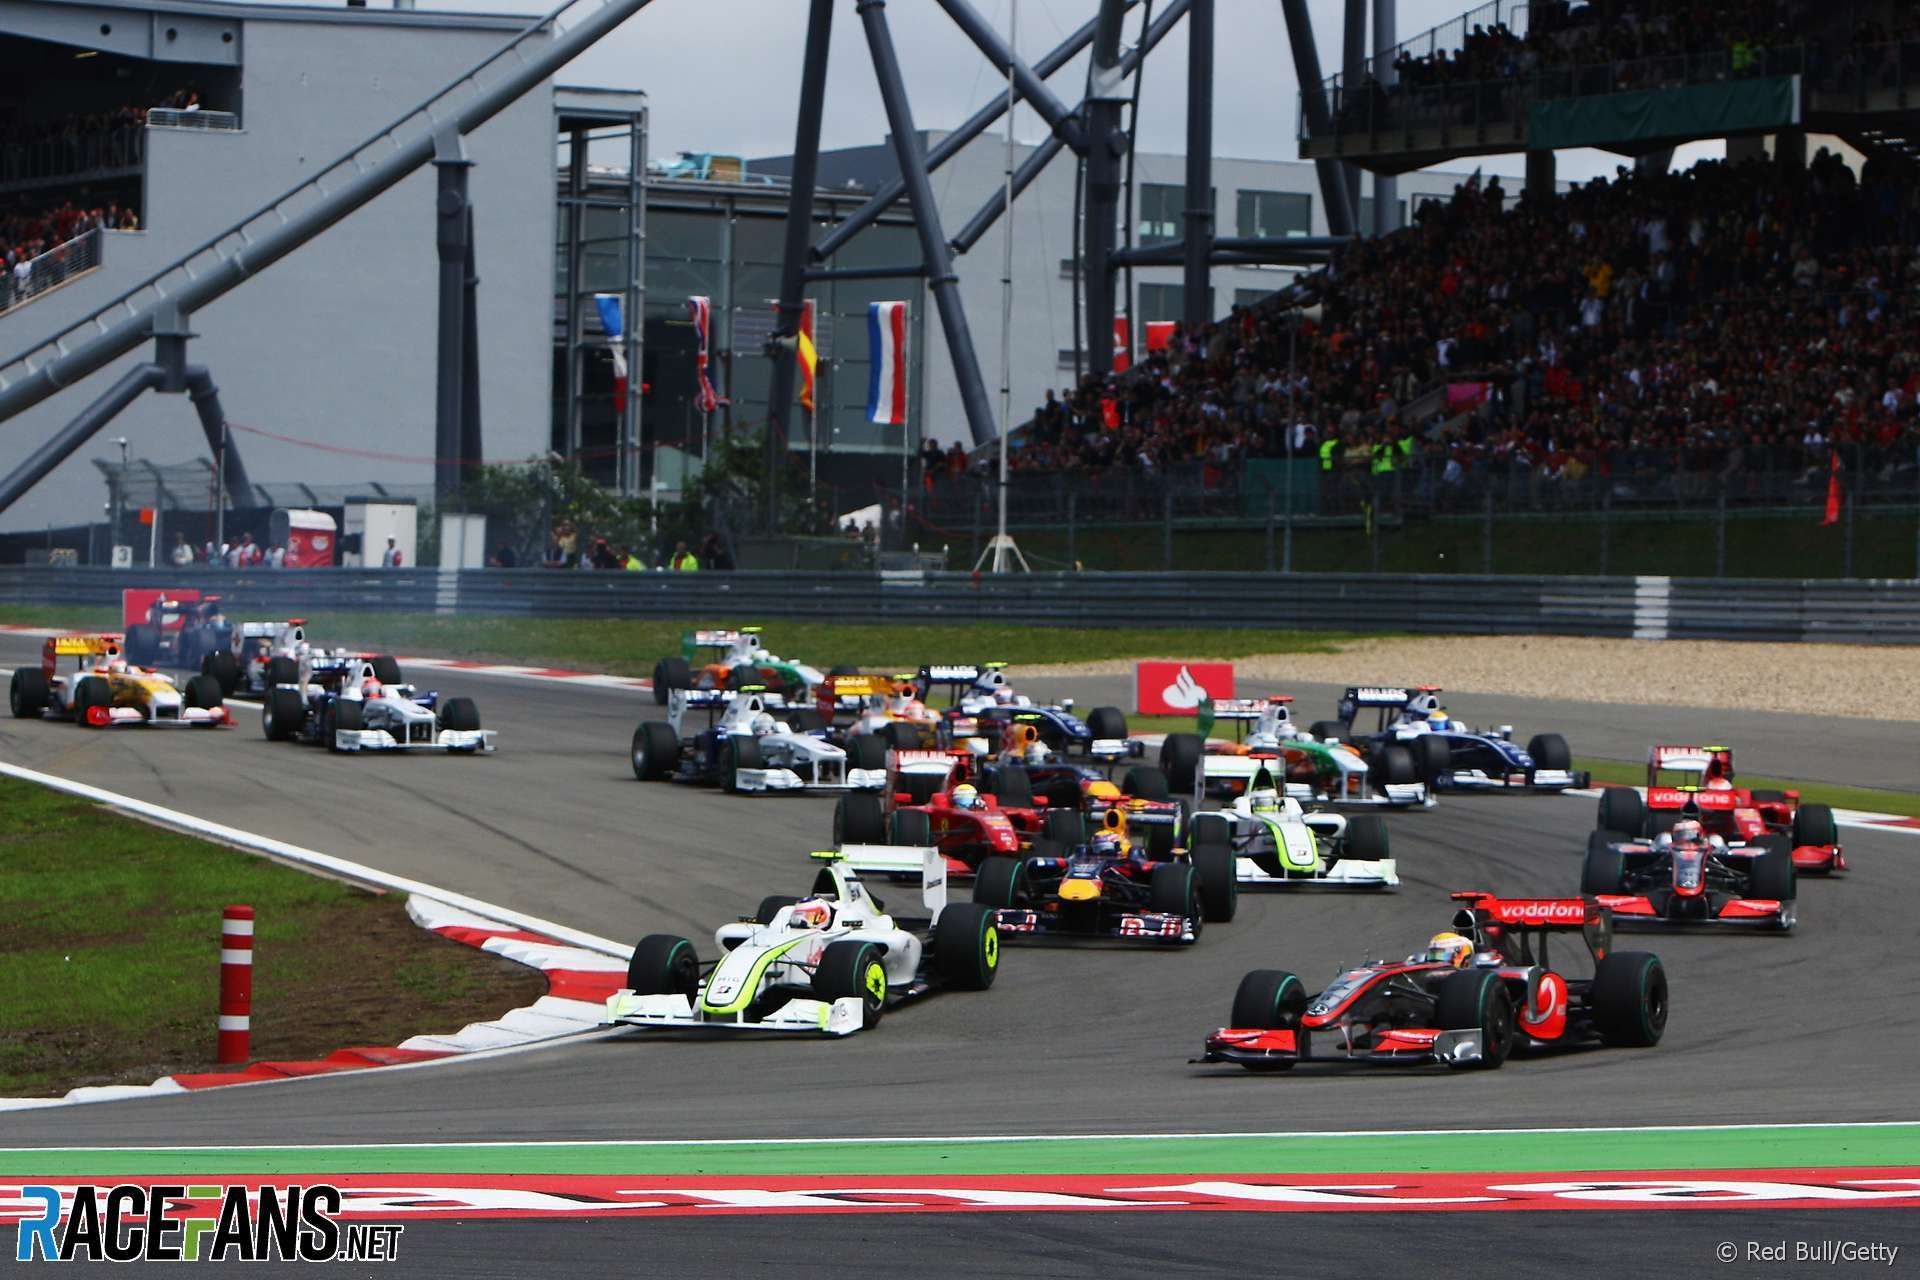 image for Nurburgring to join 2020 F1 calendar with Portimao and Imola · RaceFans